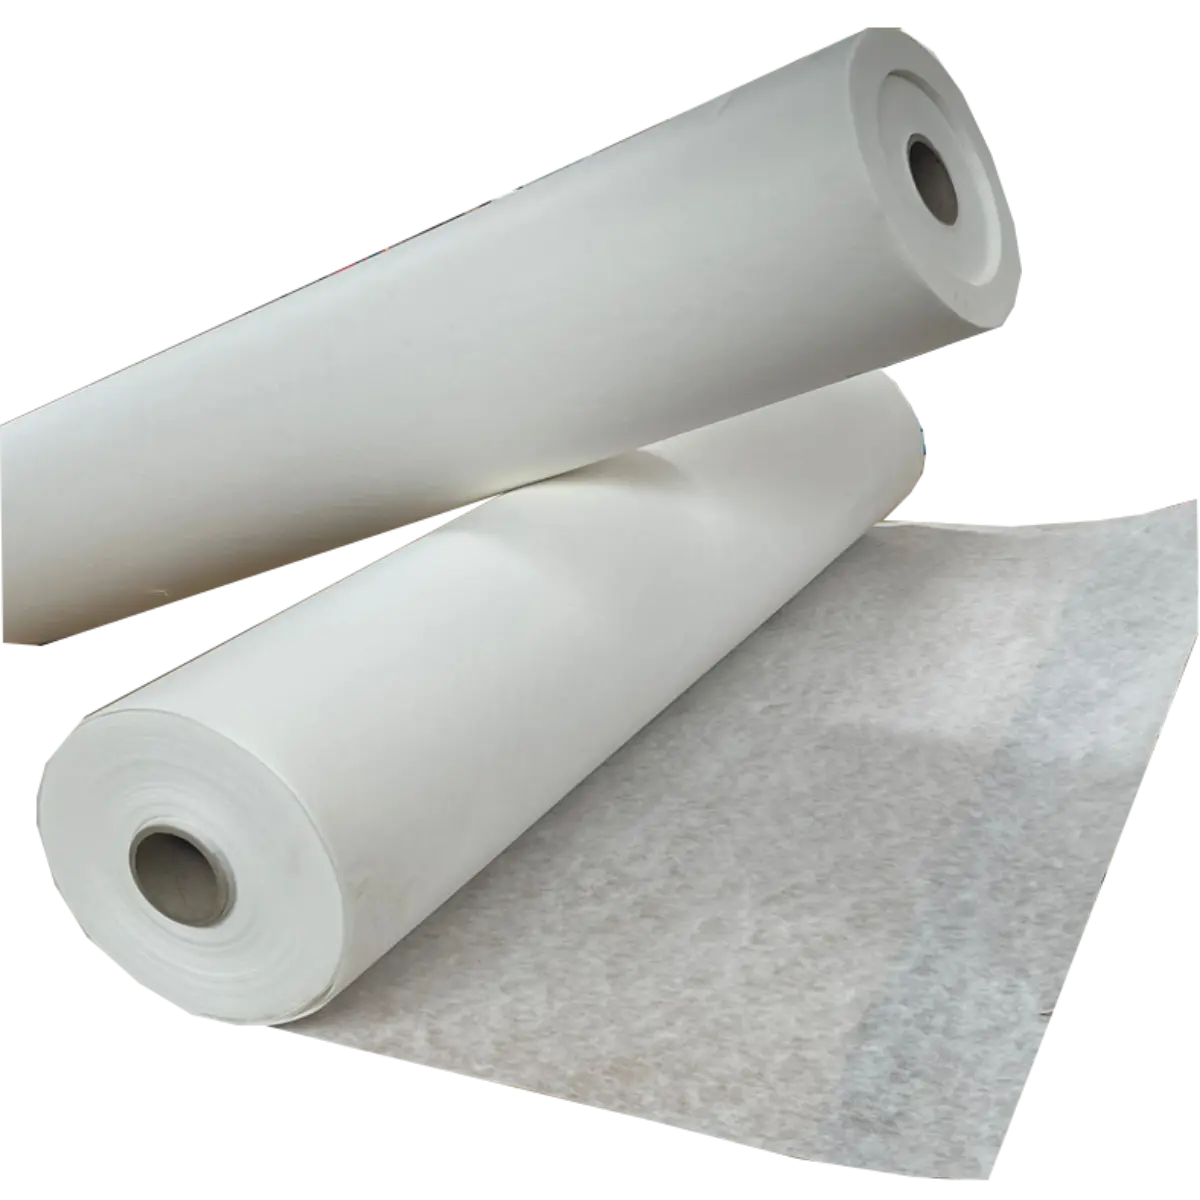 Embroidery Backing Rolls 40" White